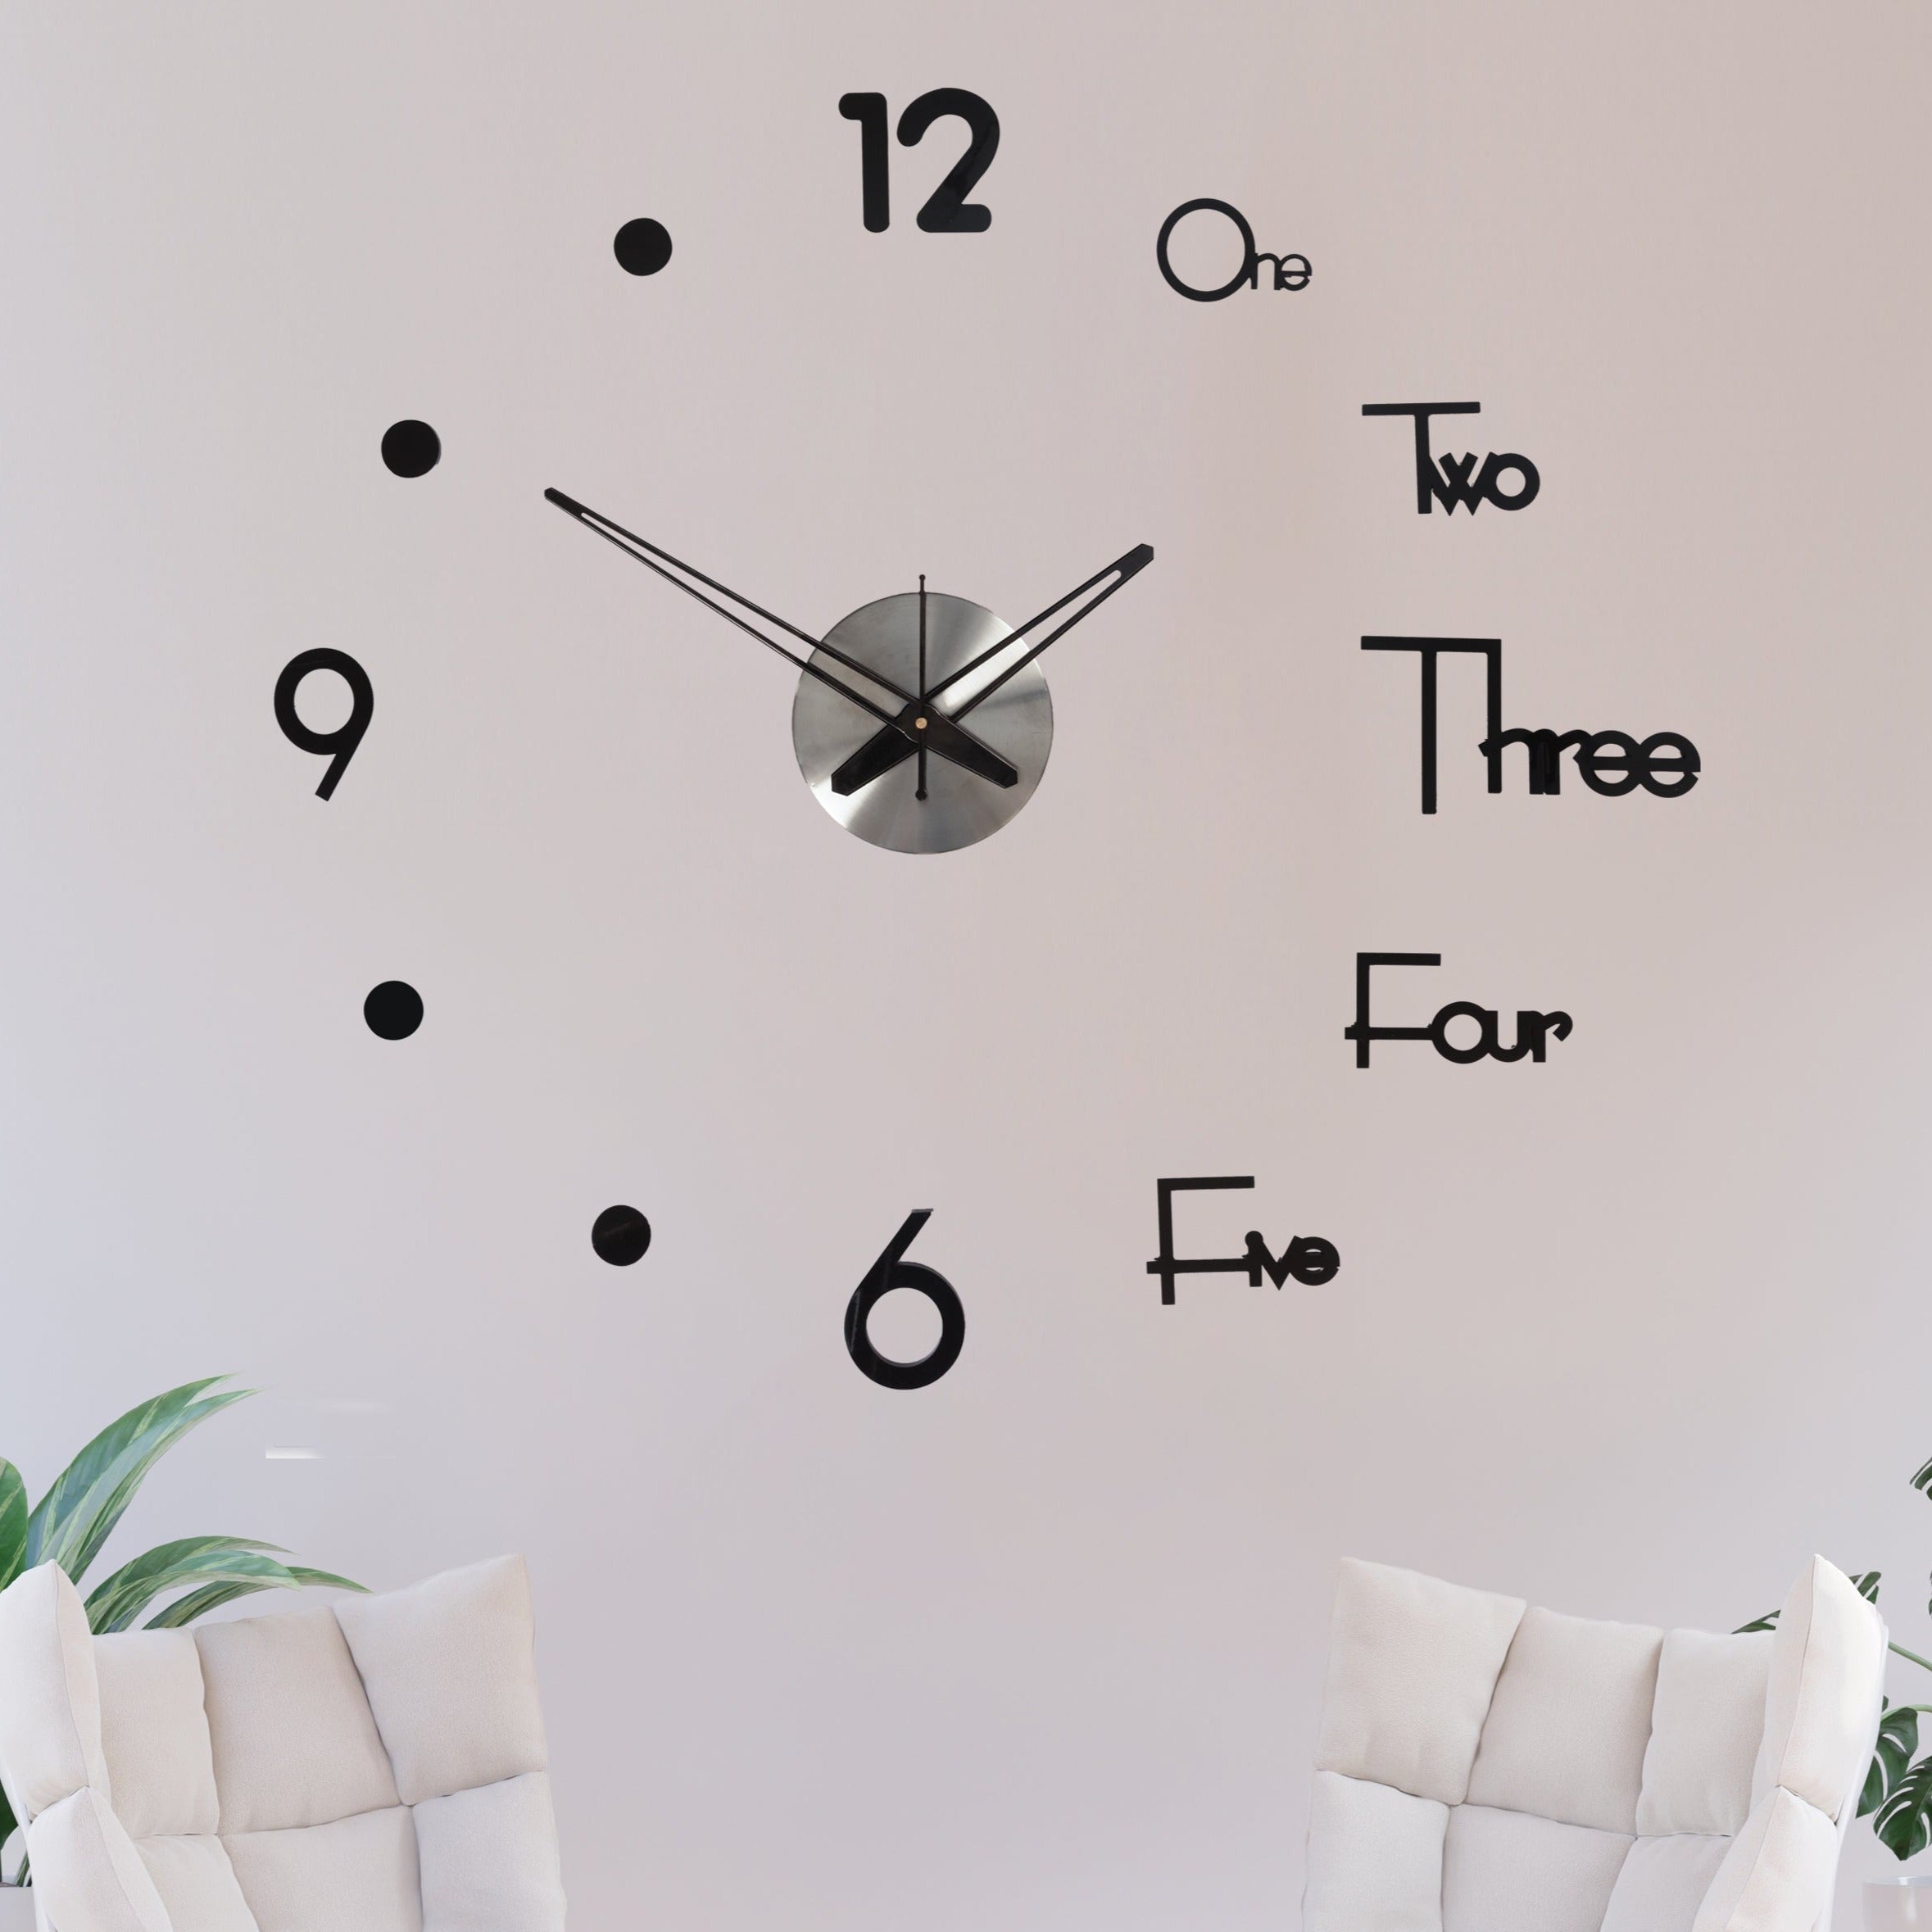 King Size Wall Clock -  Large DIY Wall Clock Kit, 3D Frameless Wall Clock with Number 5mm thick for Home Living Room Bedroom Office Decoration